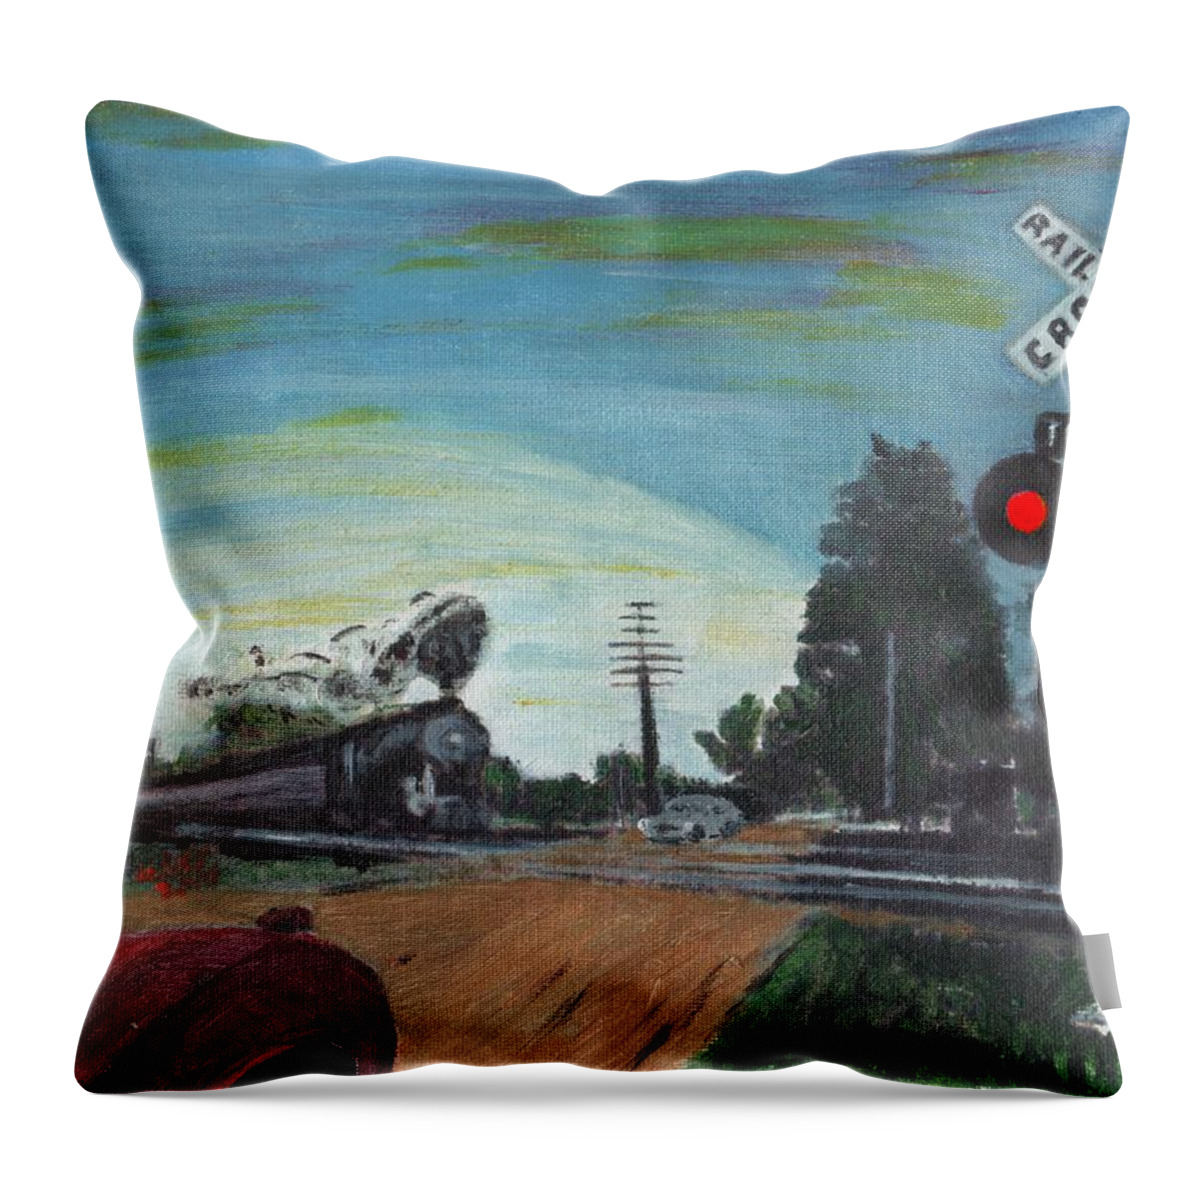 Trains Throw Pillow featuring the painting Rural America by Cliff Wilson